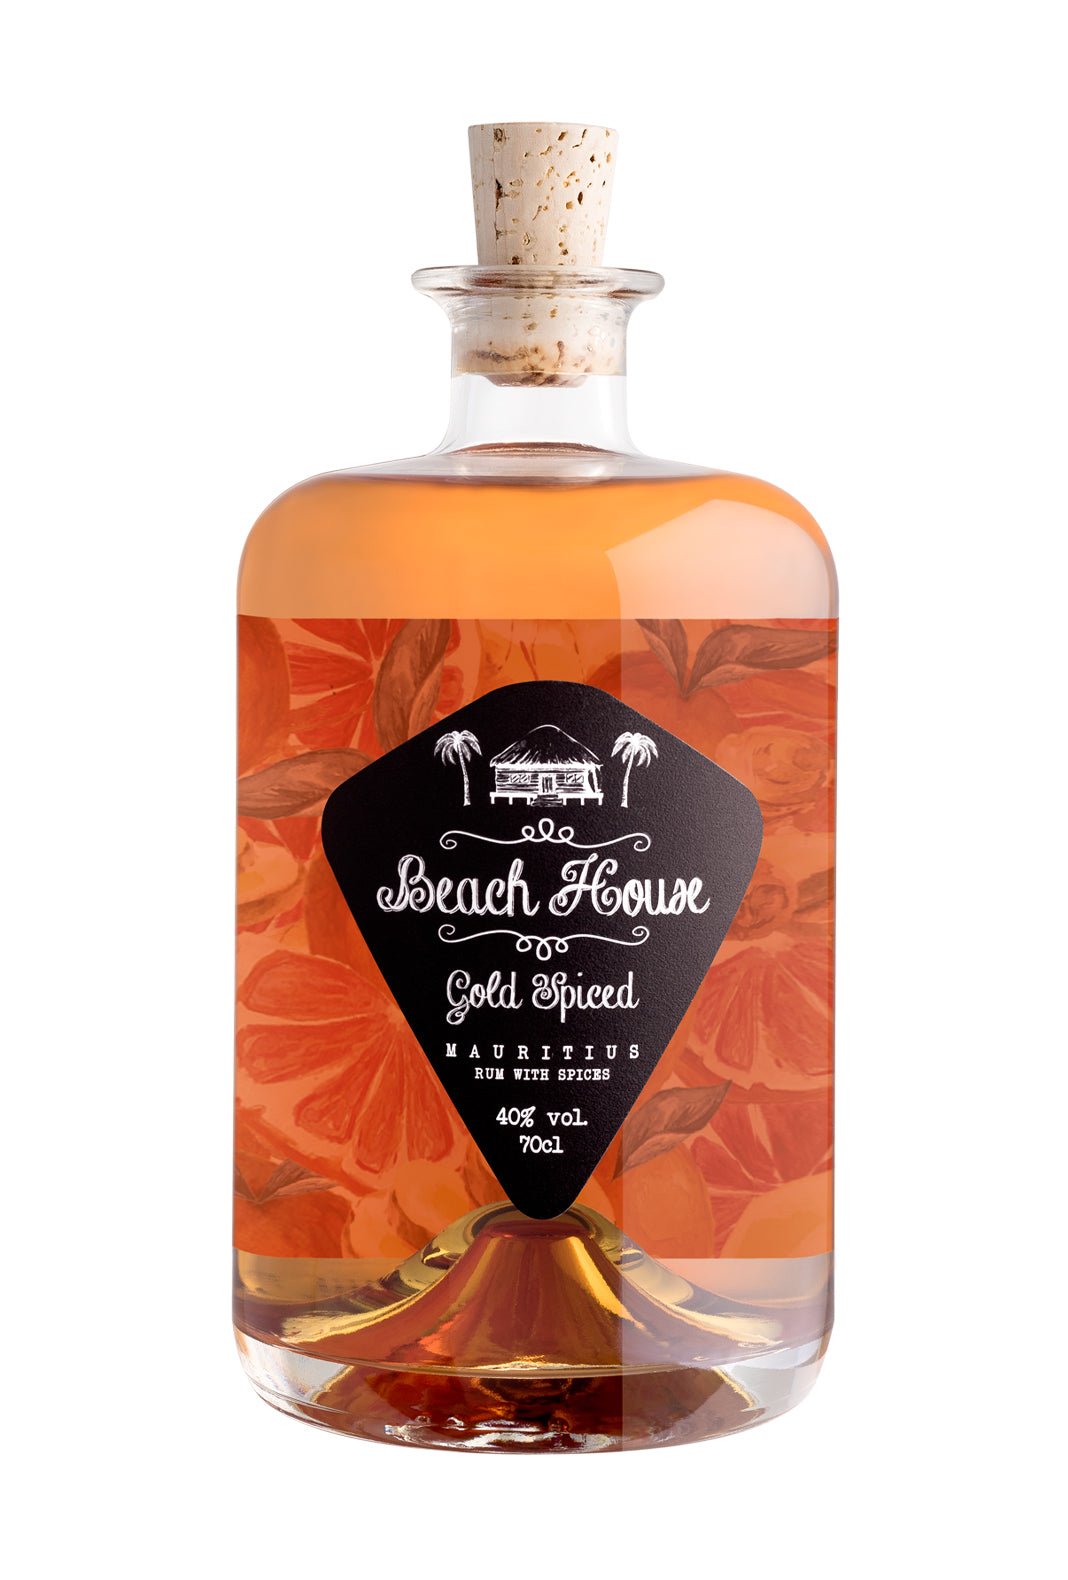 Beach House Gold Spiced Rum 40% 700ml | Rum | Shop online at Spirits of France